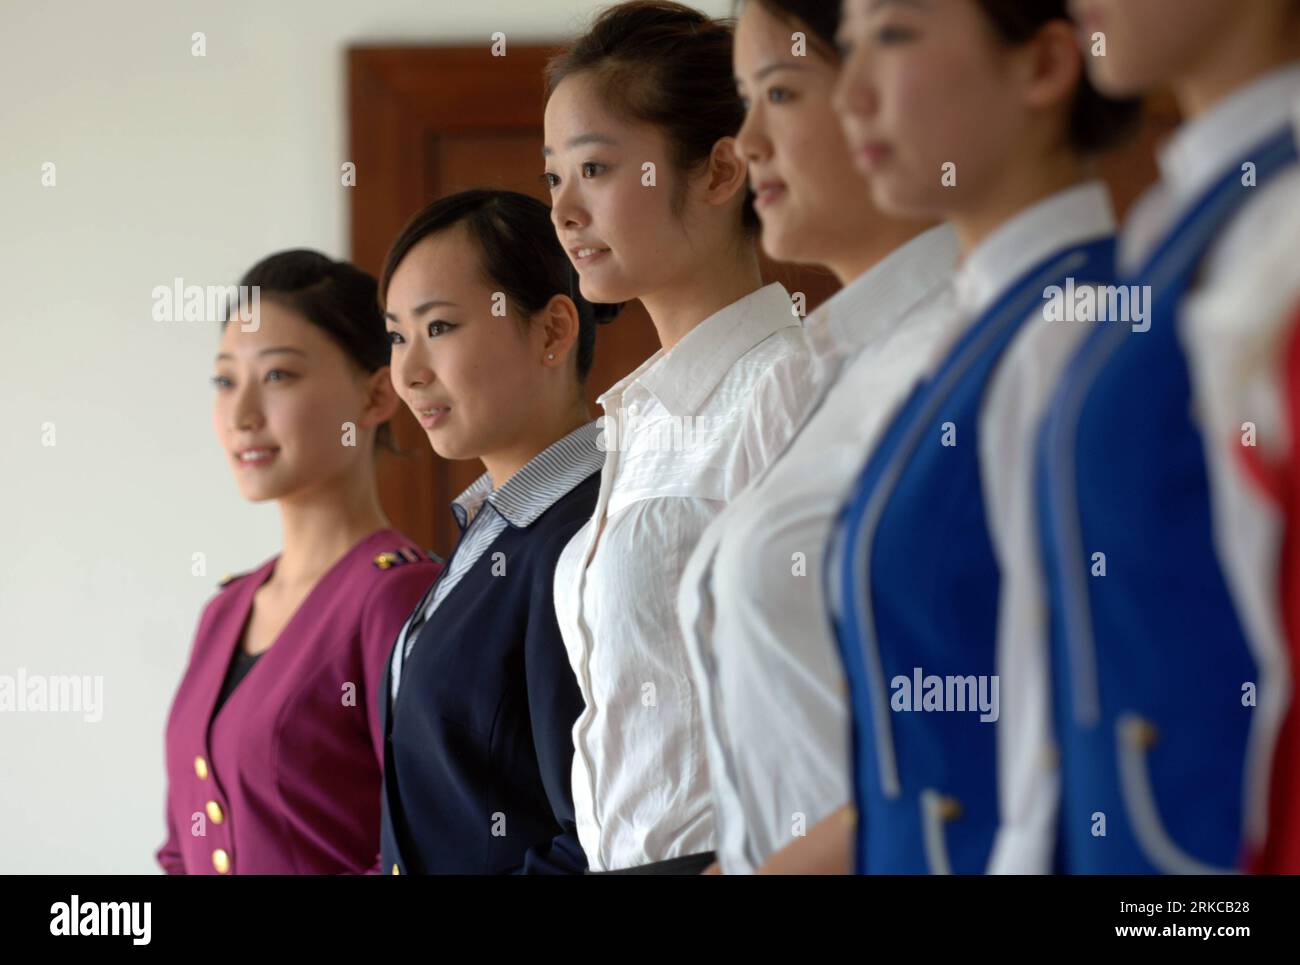 Bildnummer: 54718793  Datum: 08.12.2010  Copyright: imago/Xinhua (101208) -- HANGZHOU, Dec. 8, 2010 (Xinhua) -- Applicants are interviewed during the recruitment tests for new stewardess by Hainan Airlines in Hangzhou, capital of east China s Zhejiang Province, Dec. 8, 2010. Hainan Airlines launched a four-day interview of a flight attendant recruitment here on Wednesday. Hundreds of candidates applied for the job. (Xinhua/Huang Zongzhi) (mcg) CHINA-HANGZHOU-FLIGHT ATTENDANT-RECRUITMENT (CN) PUBLICATIONxNOTxINxCHN Wirtschaft kbdig xkg 2010 quer o0 Flugbegleiter, Flugbegleiterin, Rekrutierung, Stock Photo